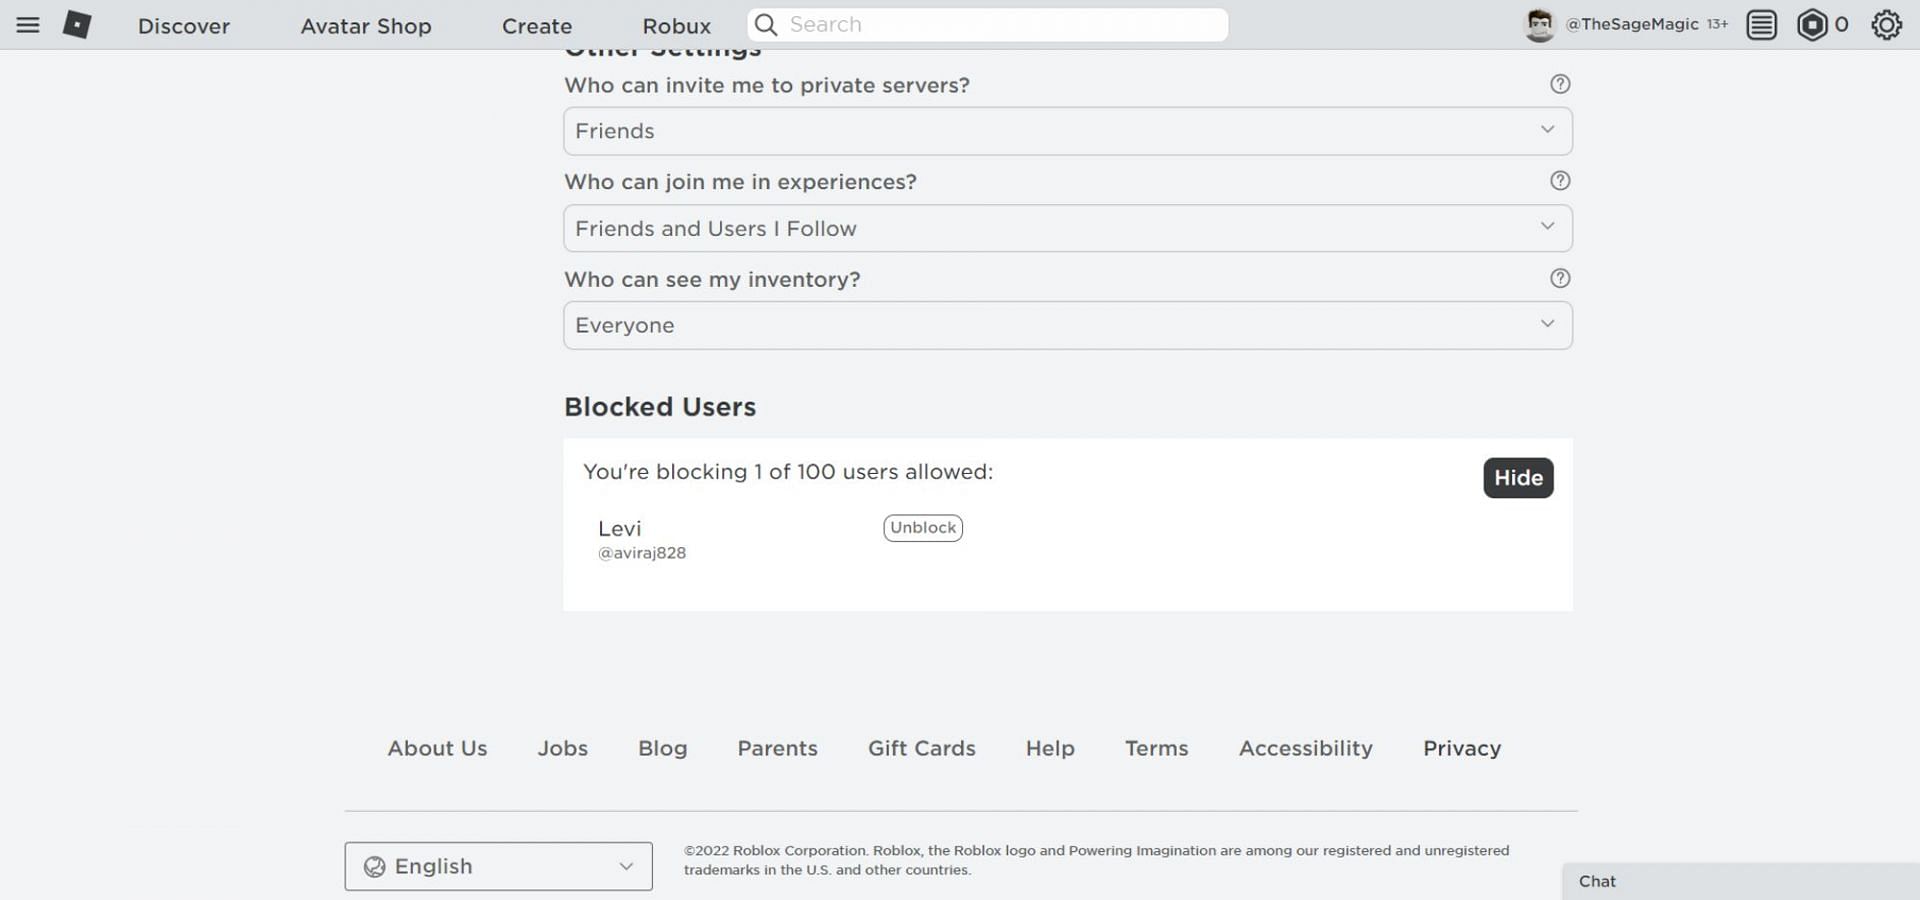 Unblock selected users (Image via Roblox)